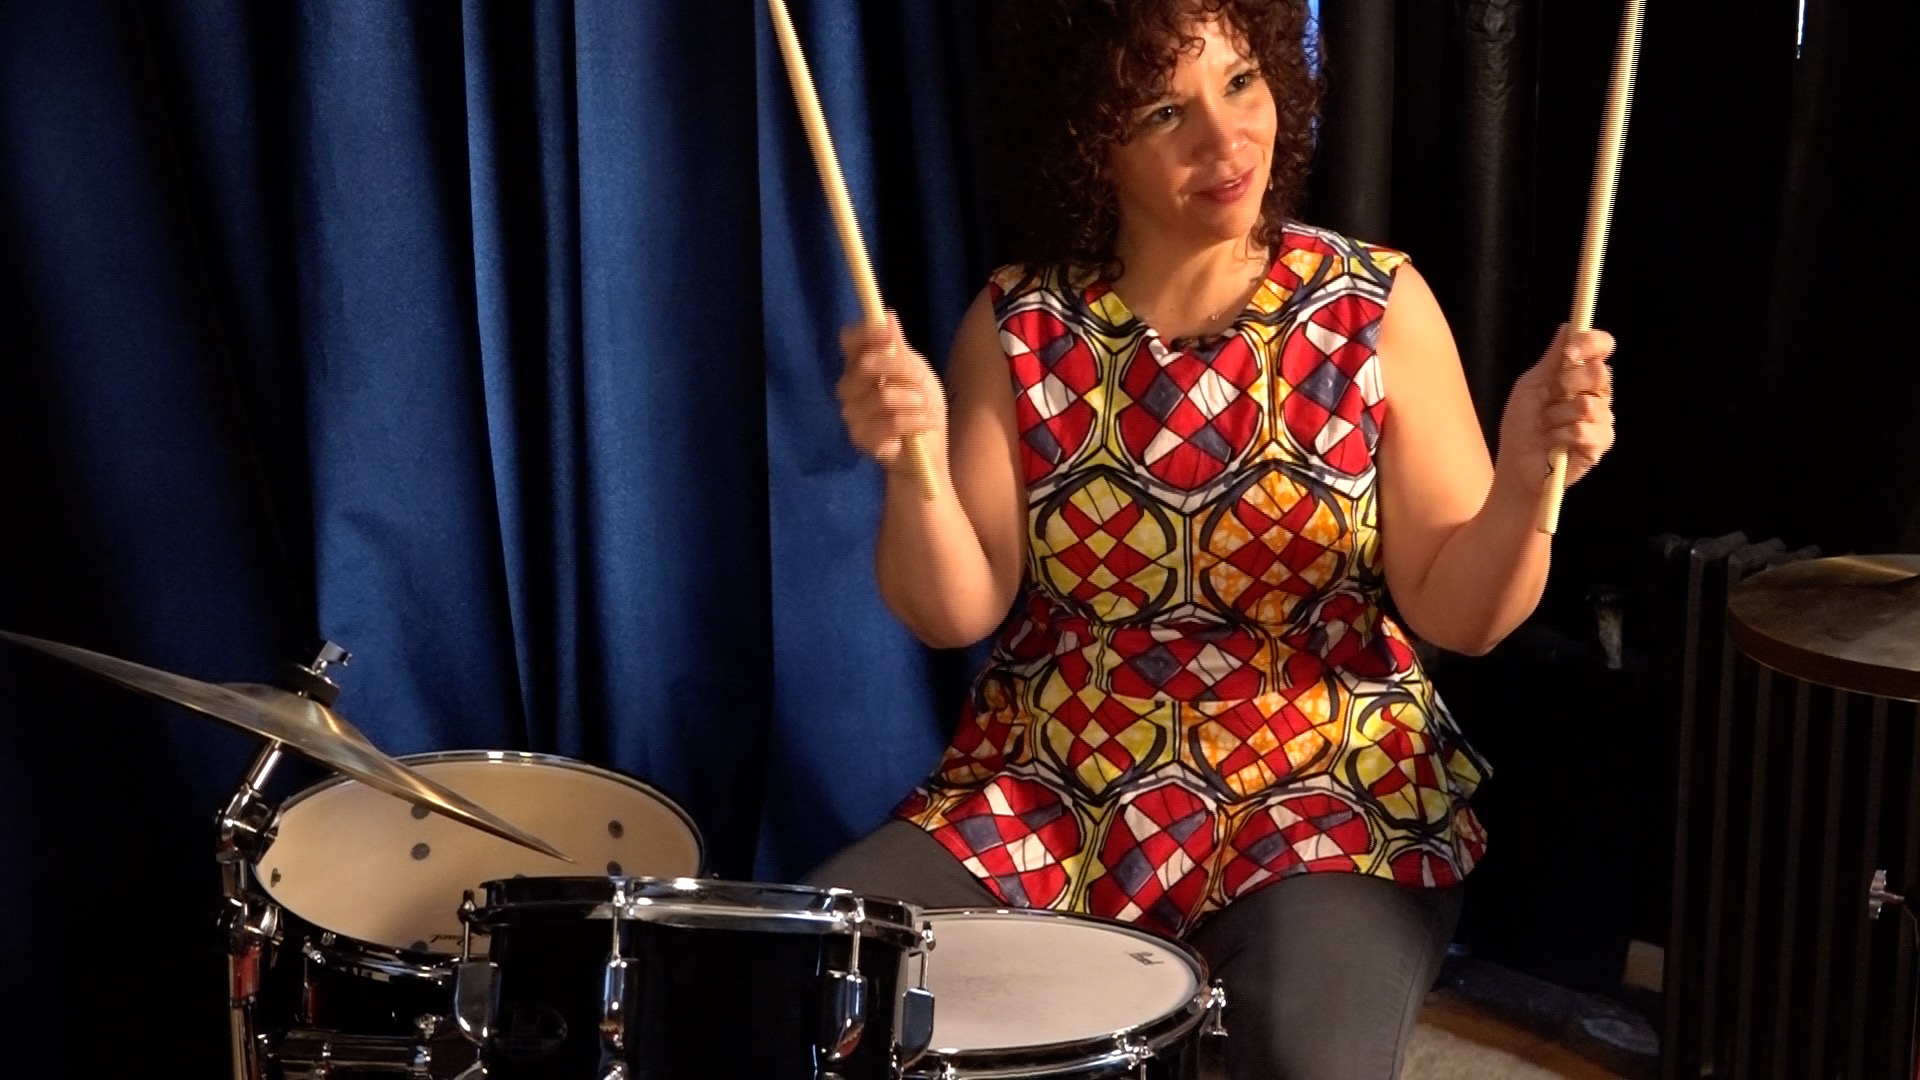 Introduction to drums course with LaFrae Sci